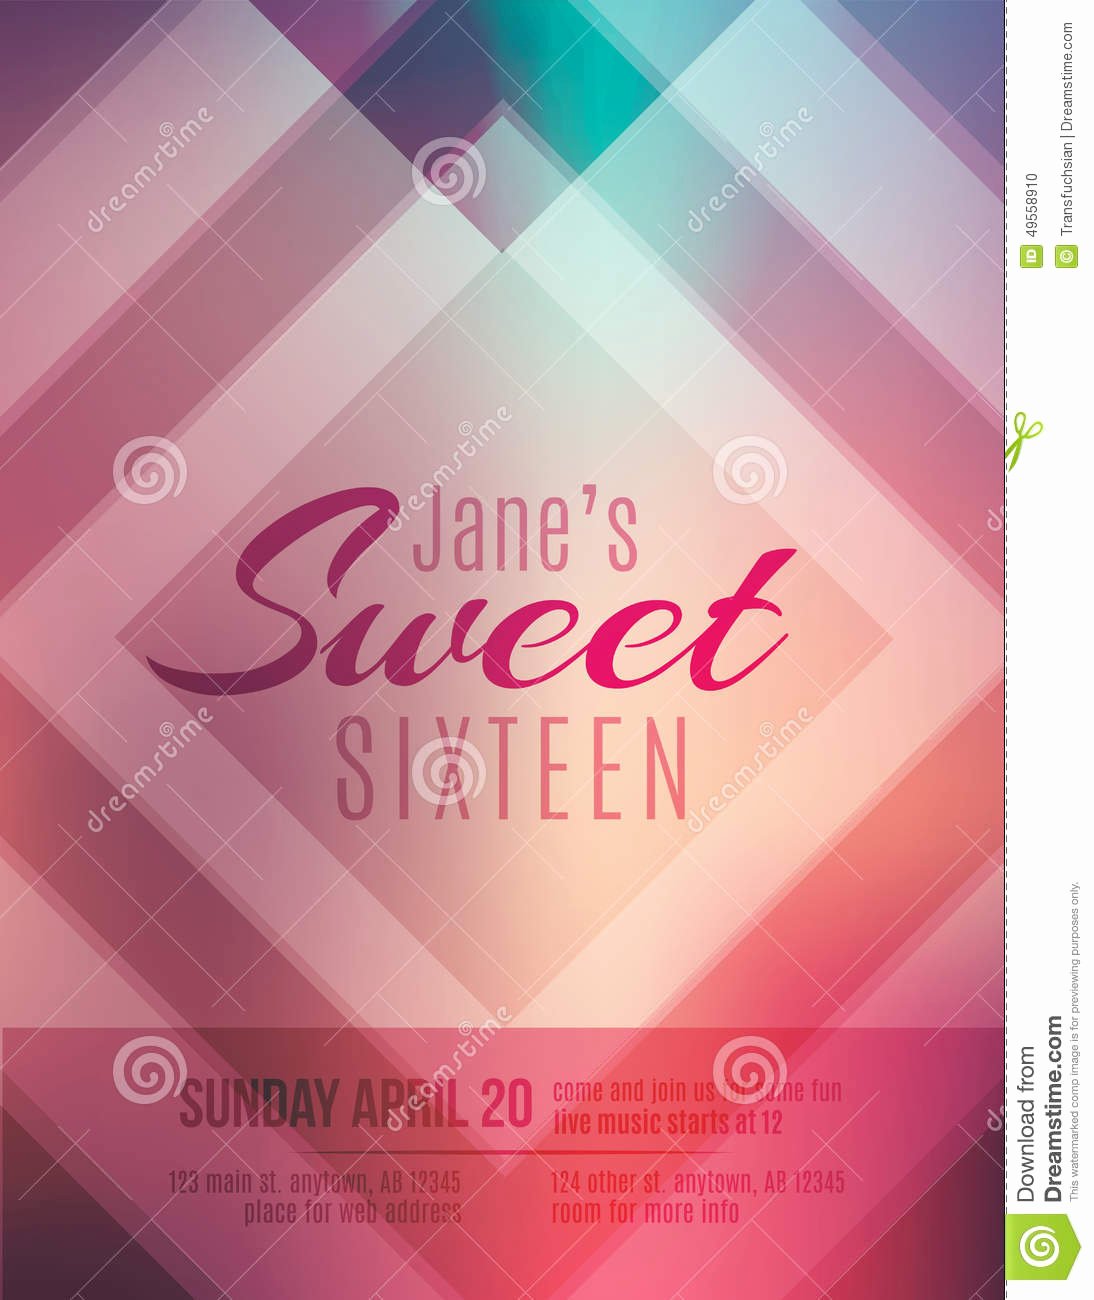 Sweet Sixteen Party Invitation Flyer Template Stock Vector